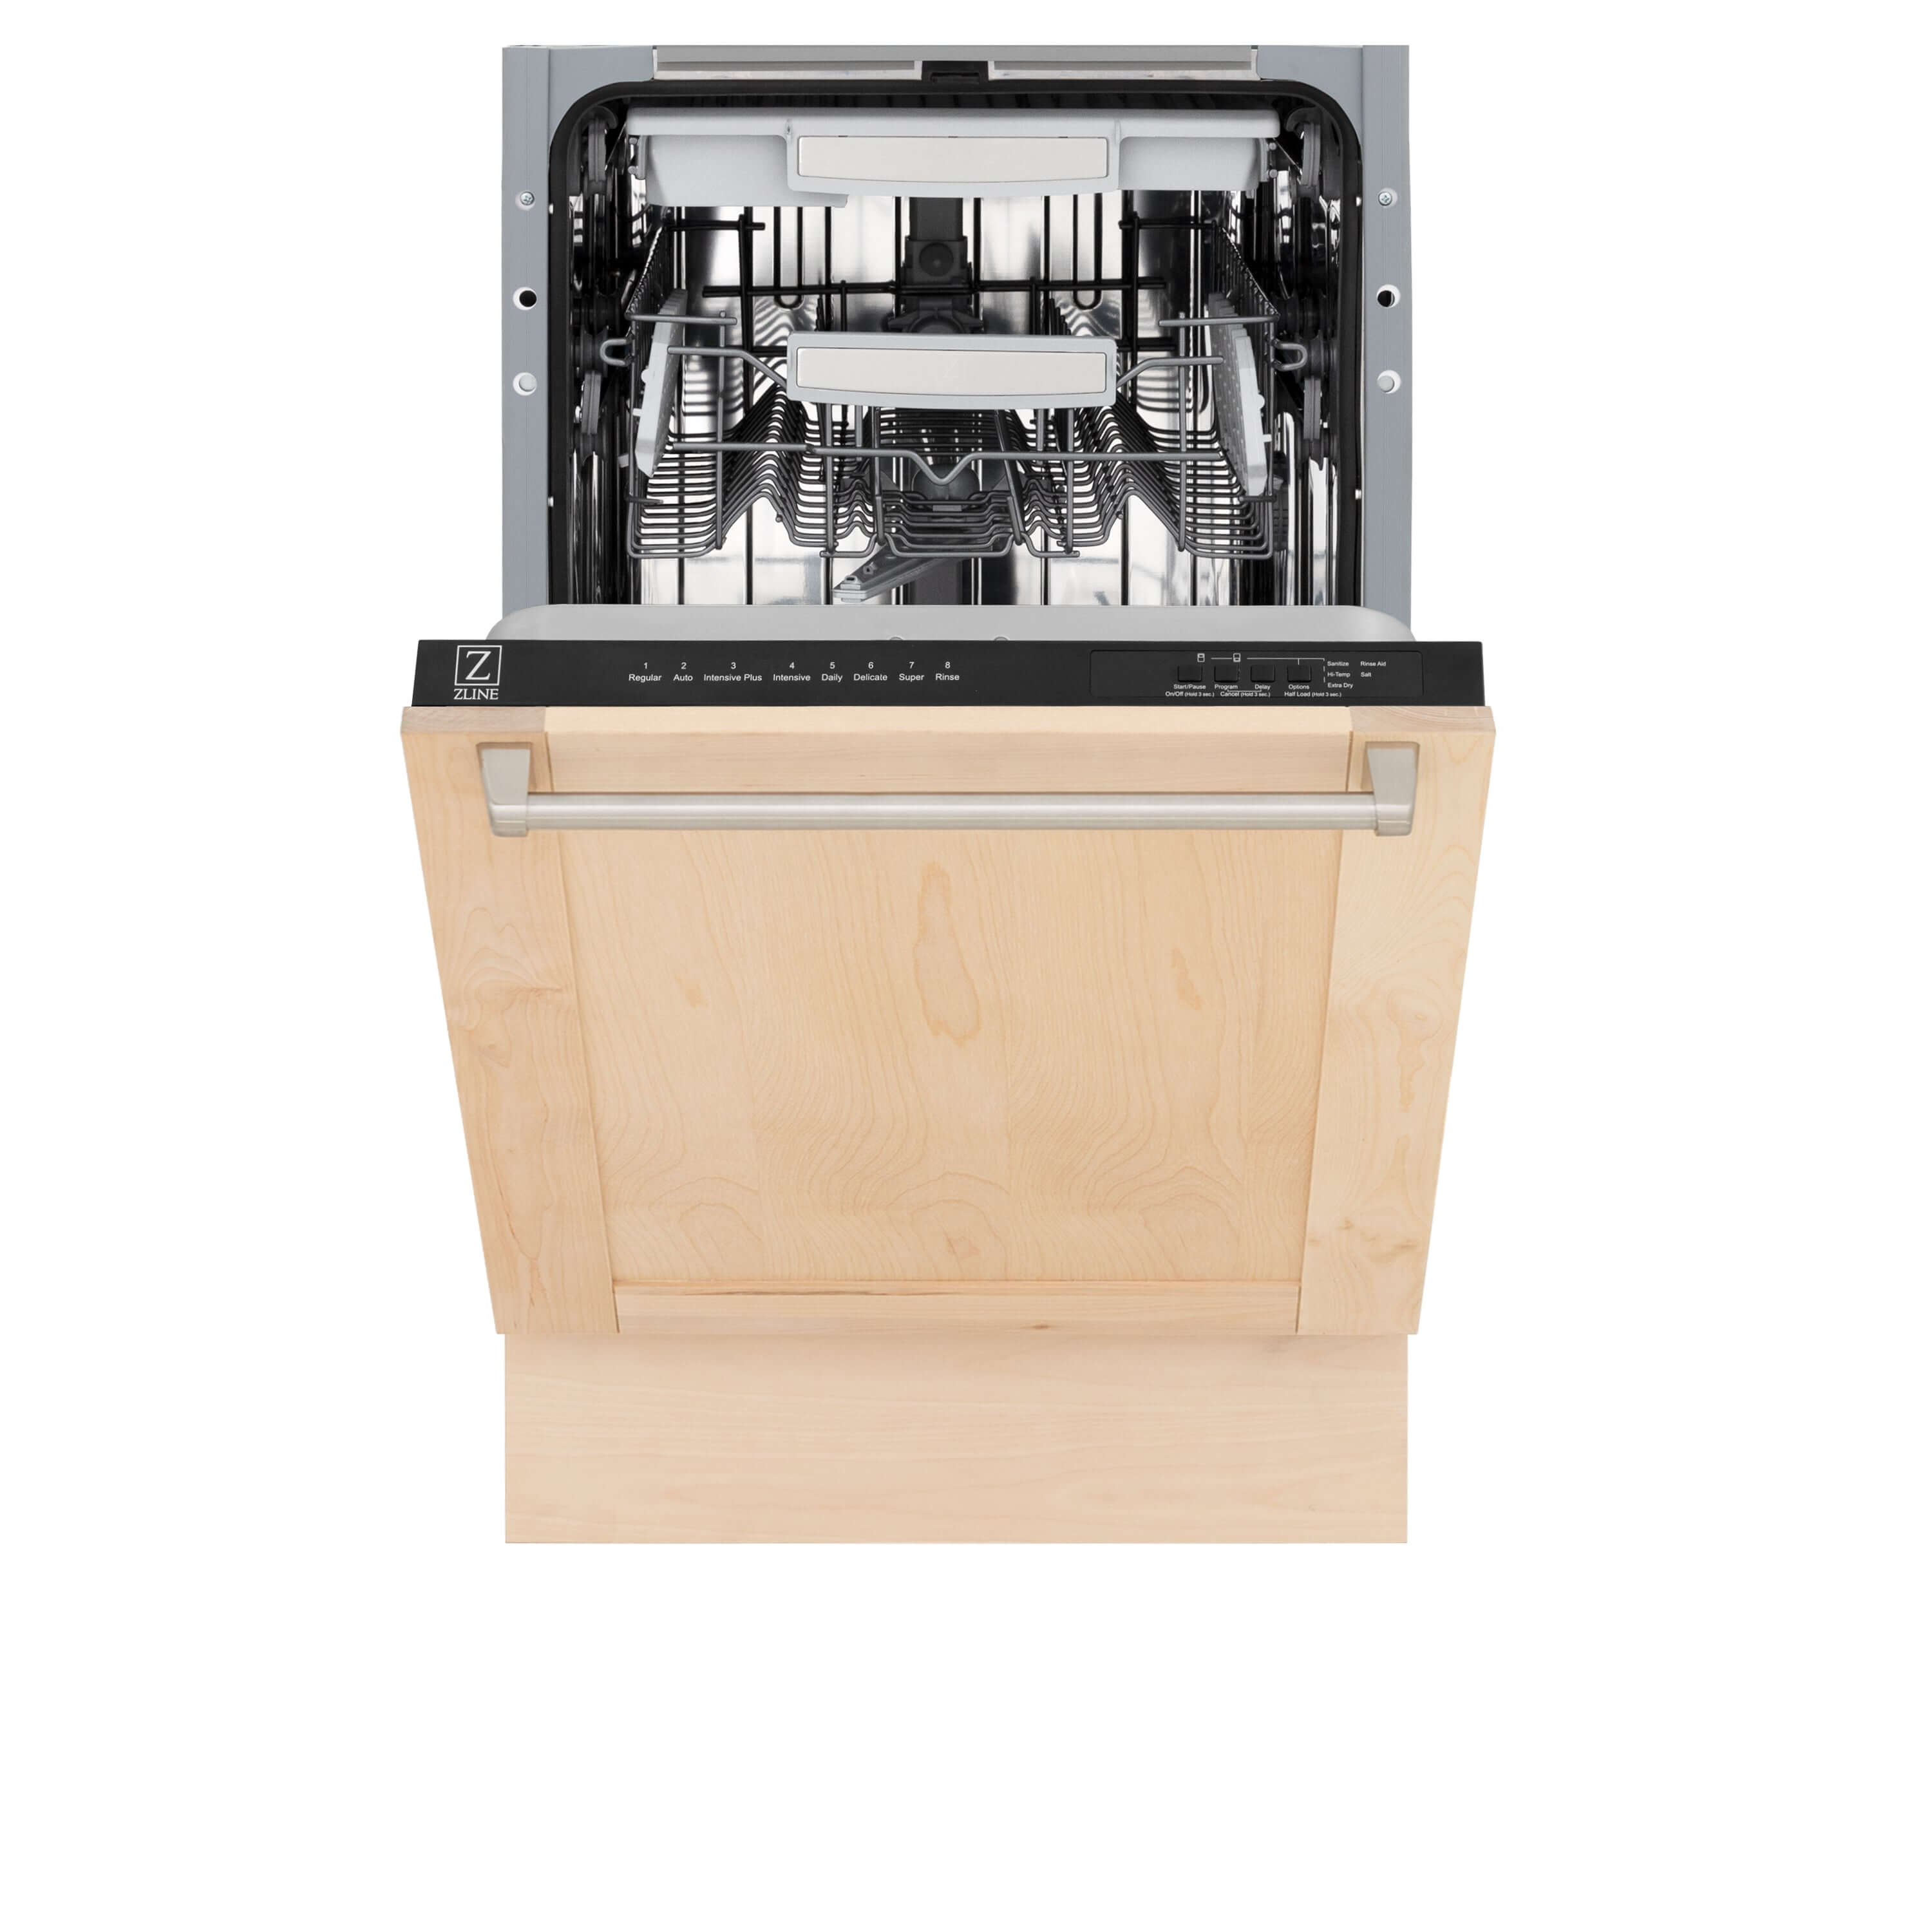 ZLINE 18 in. Tallac Series 3rd Rack Top Control Dishwasher in a Stainless Steel Tub with Unfinished Wooden Panel, 51dBa (DWV-UF-18)